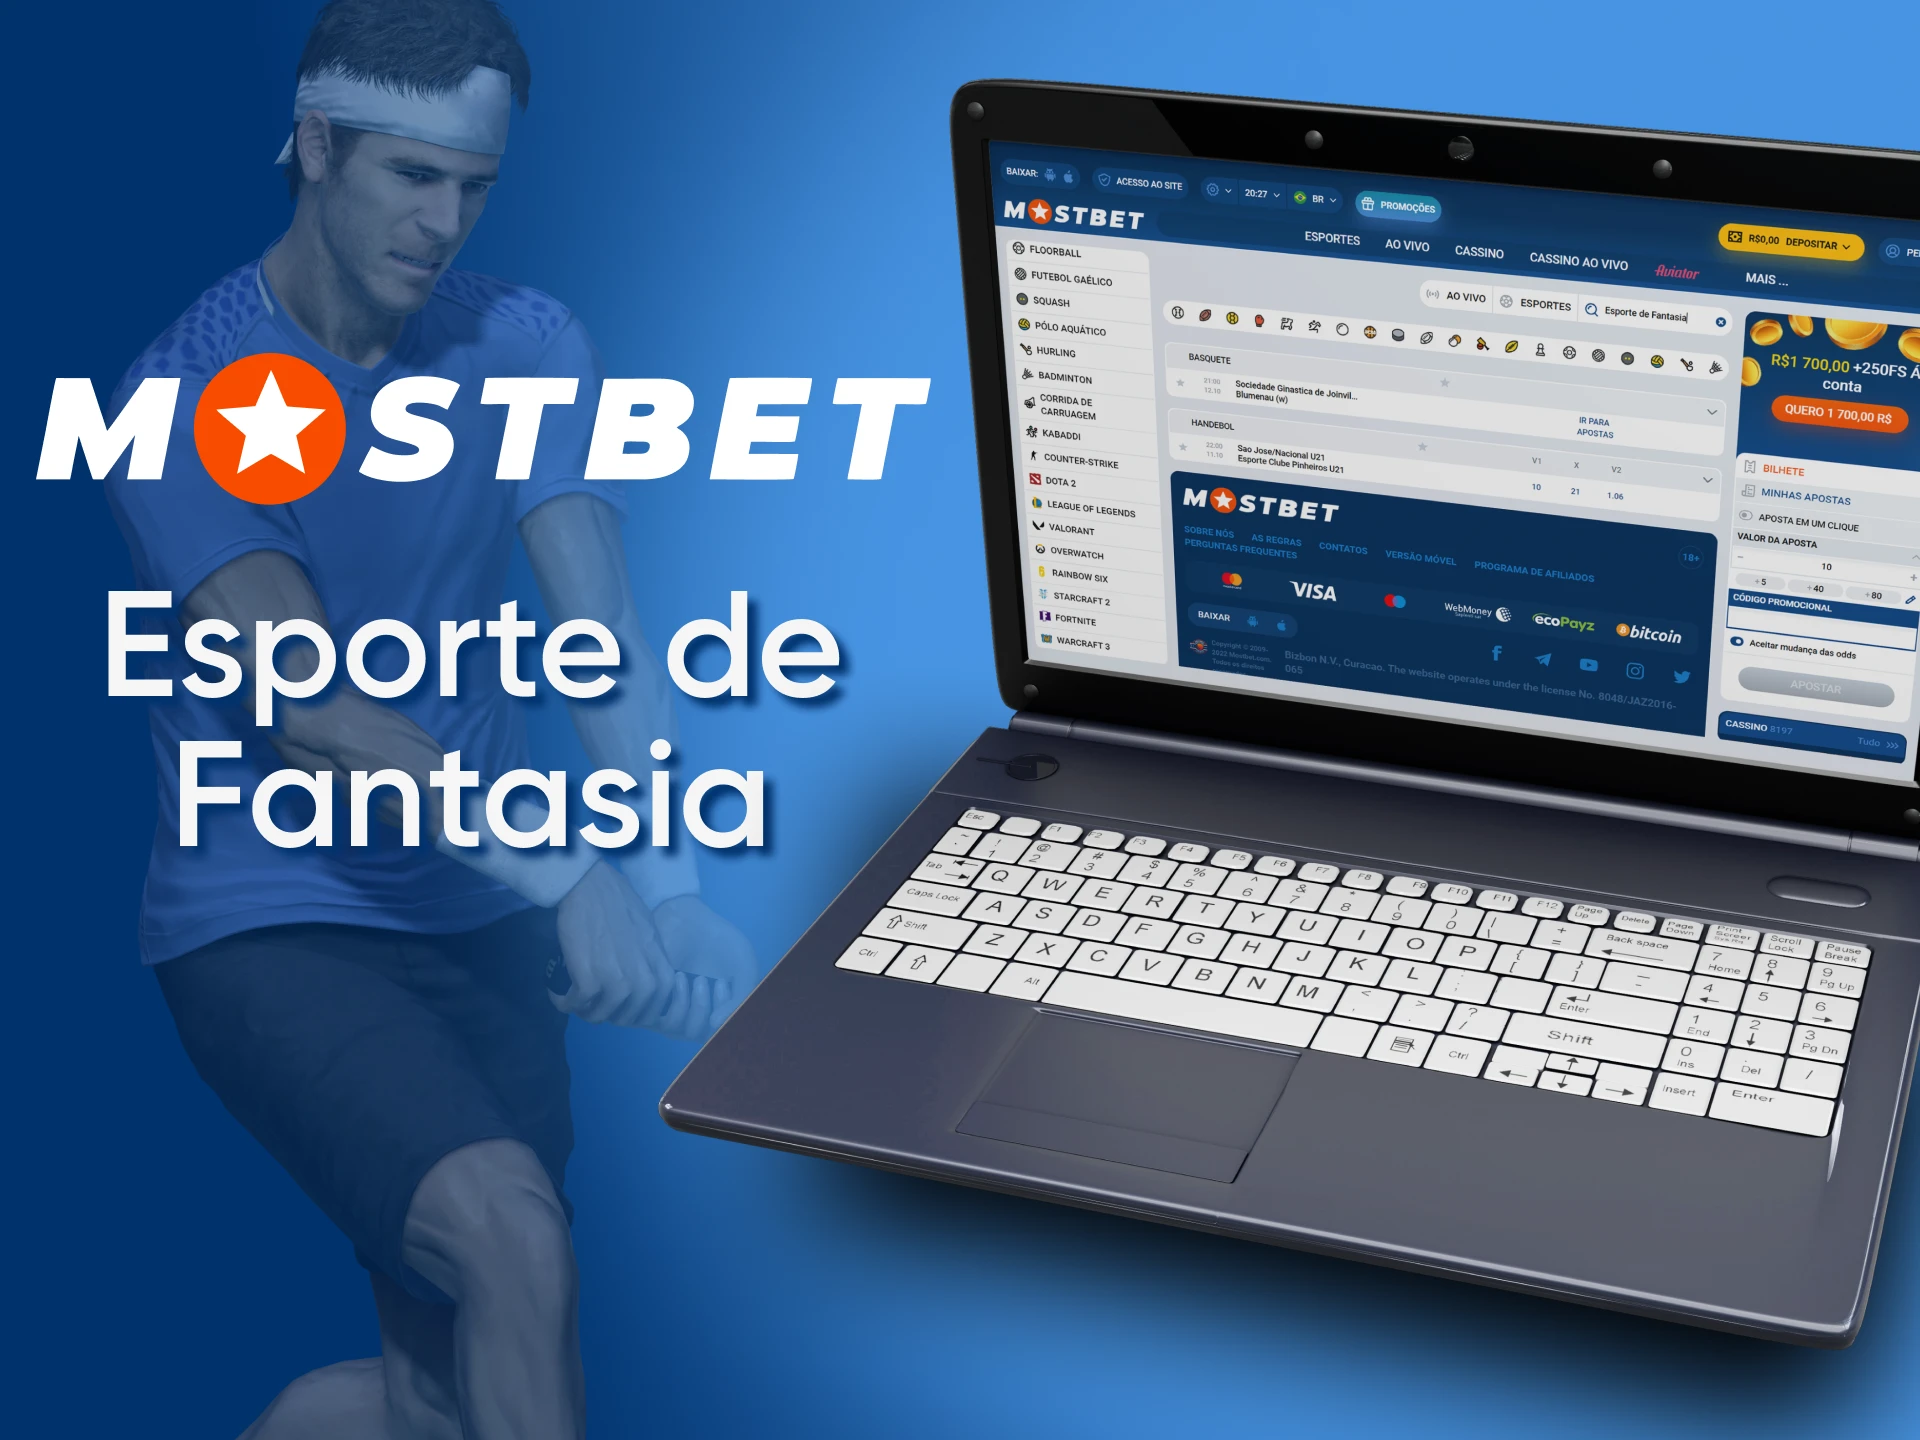 Bet on fantasy sports with Mostbet and choose your own players and game times.